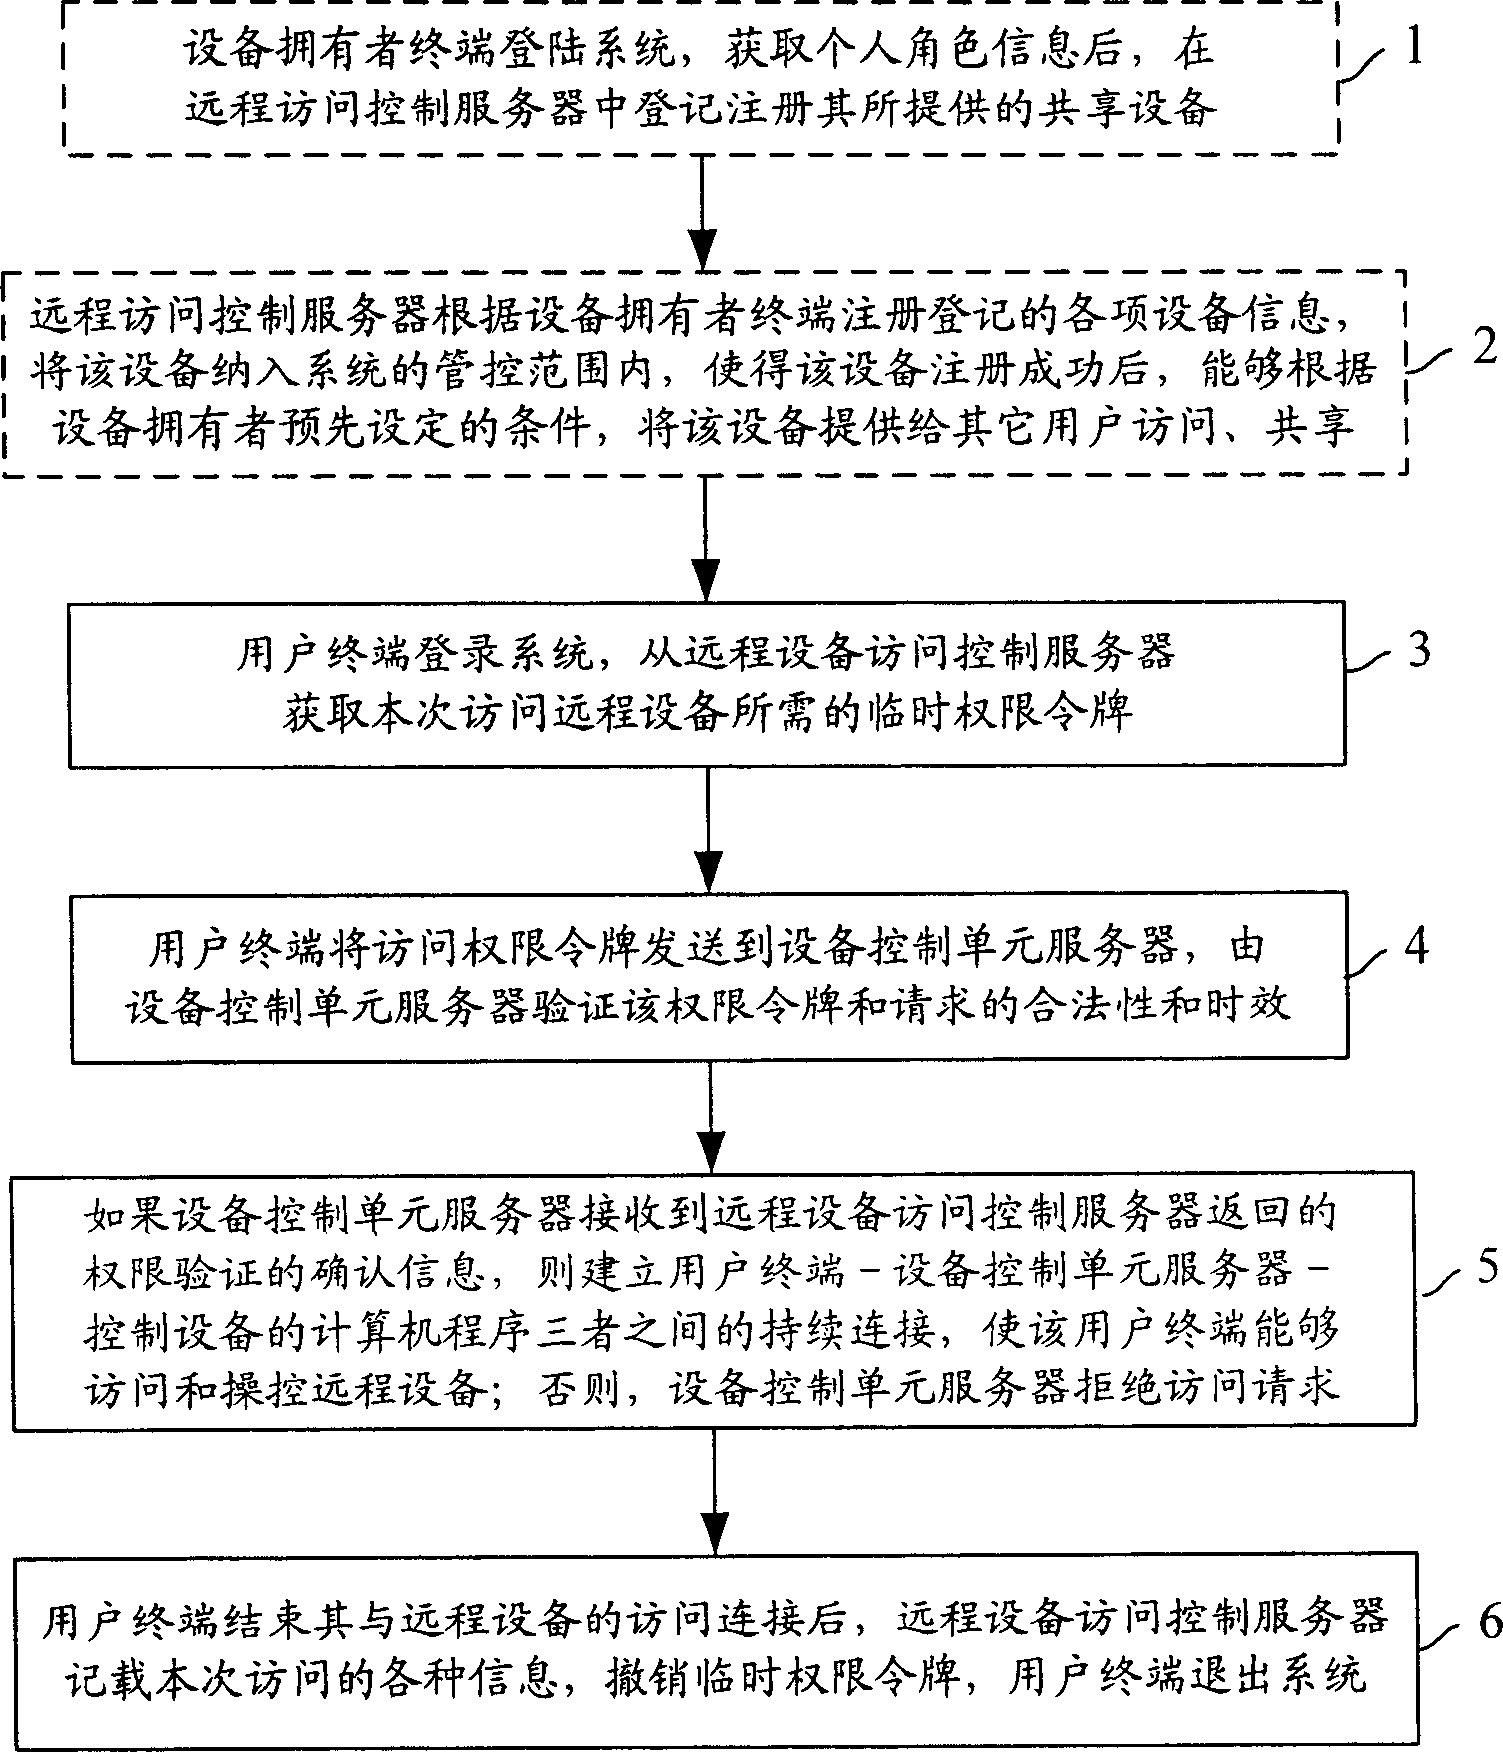 System and method based on internet access and shared remote apparatus